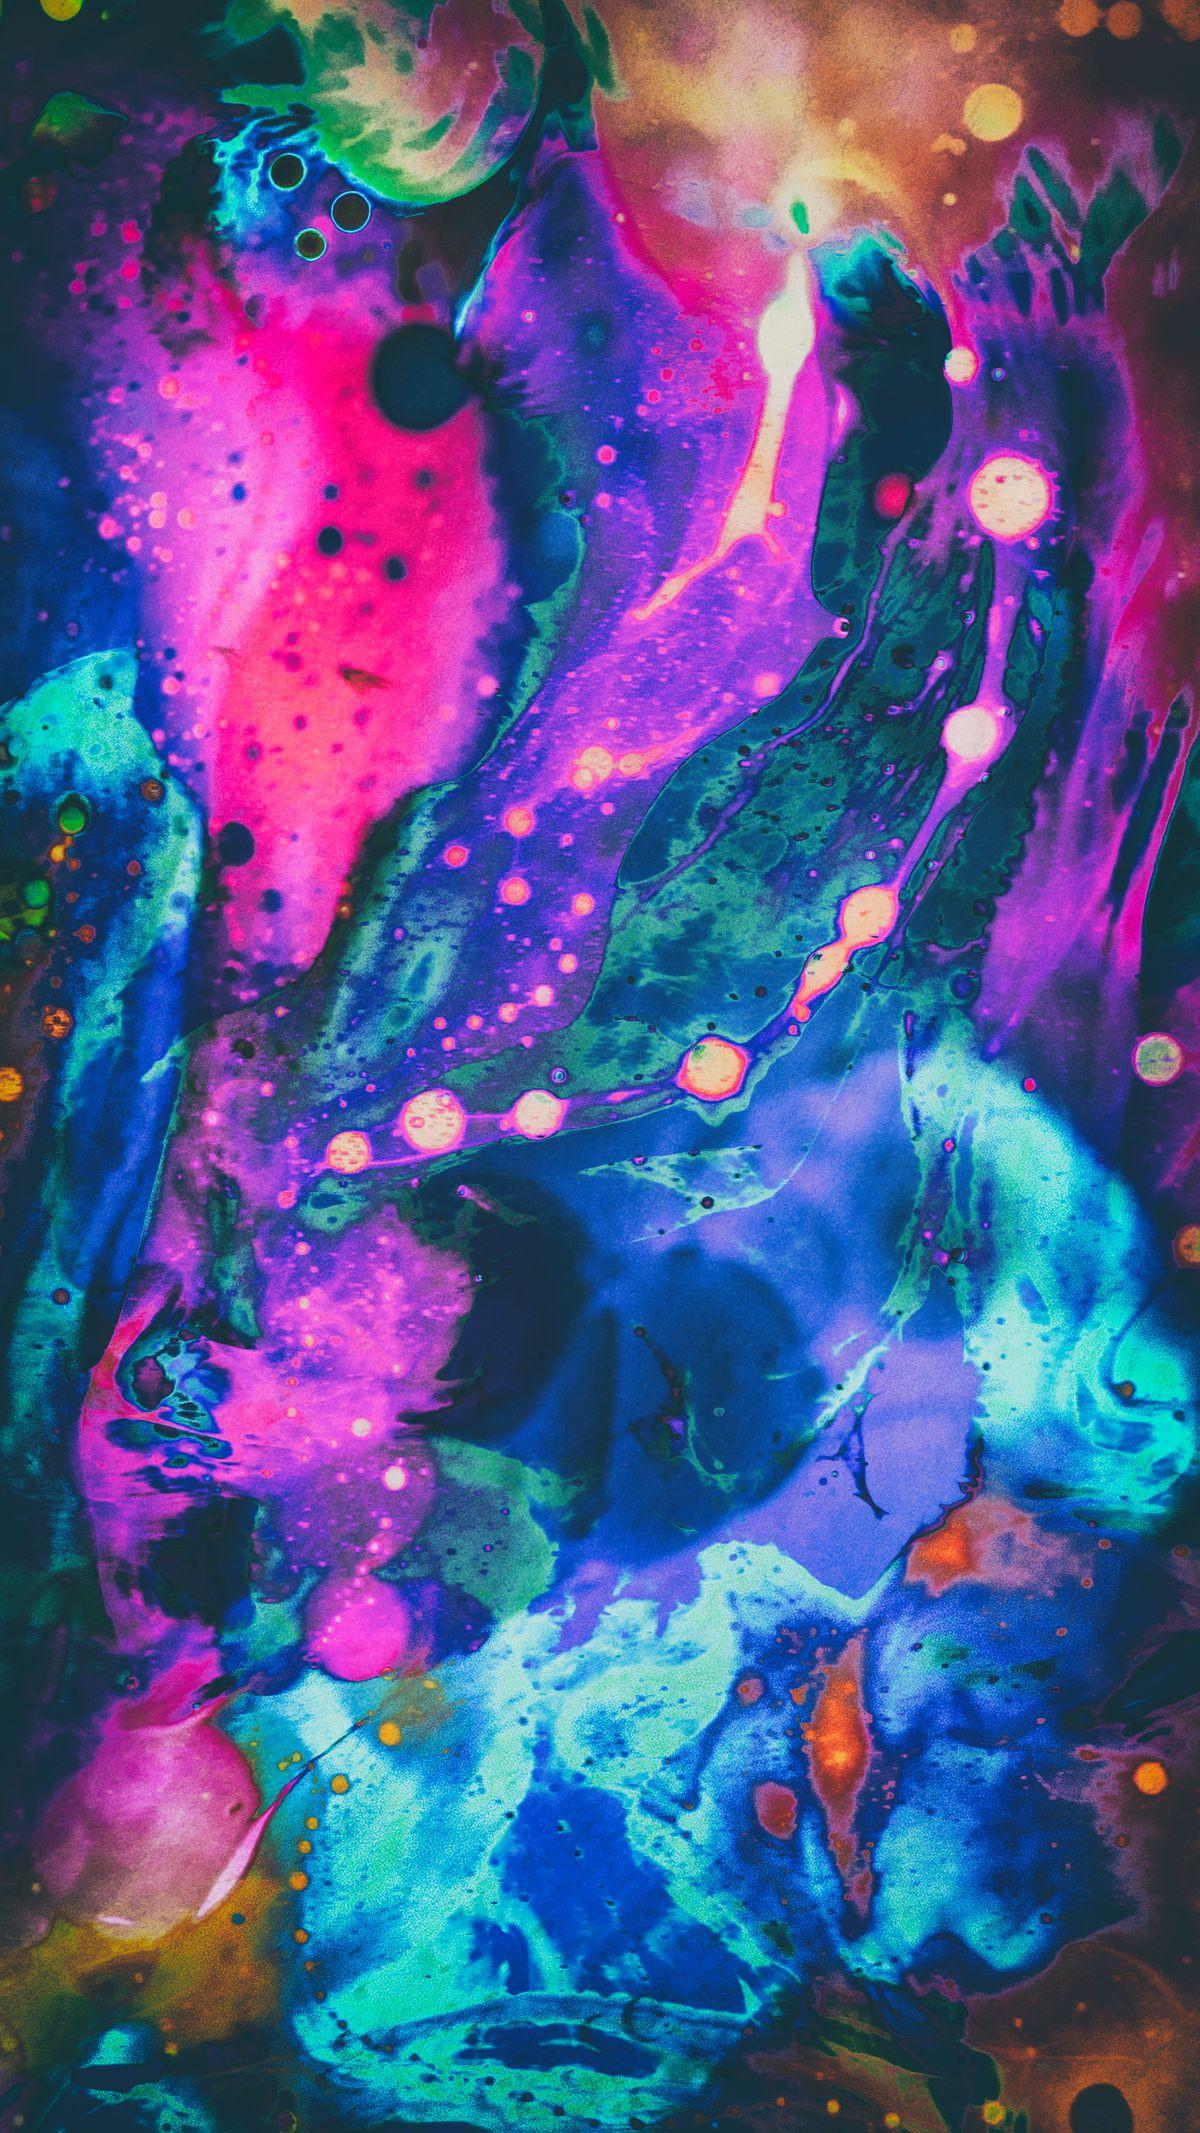 Trippy Iphone 11 Wallpapers Wallpaper Cave Each of our wallpapers can be downloaded to fit almost any device, no matter if you're running an android phone, iphone, tablet or pc. trippy iphone 11 wallpapers wallpaper